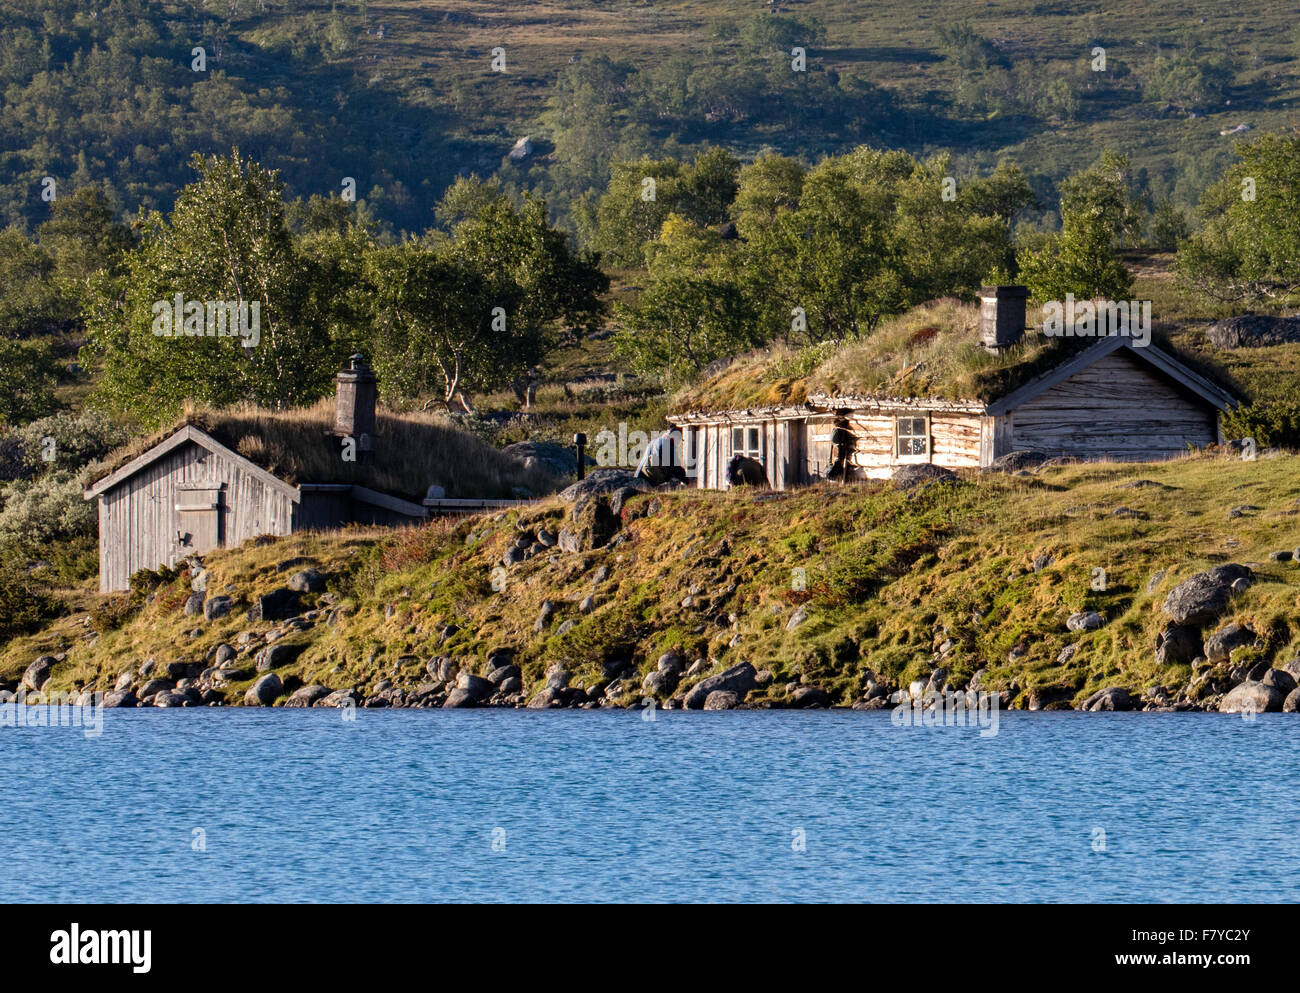 Ancient wooden cabins or rorbuer with grass roofs on the shores of Lake Gjende in the Jotunheimen National Park Norway Stock Photo